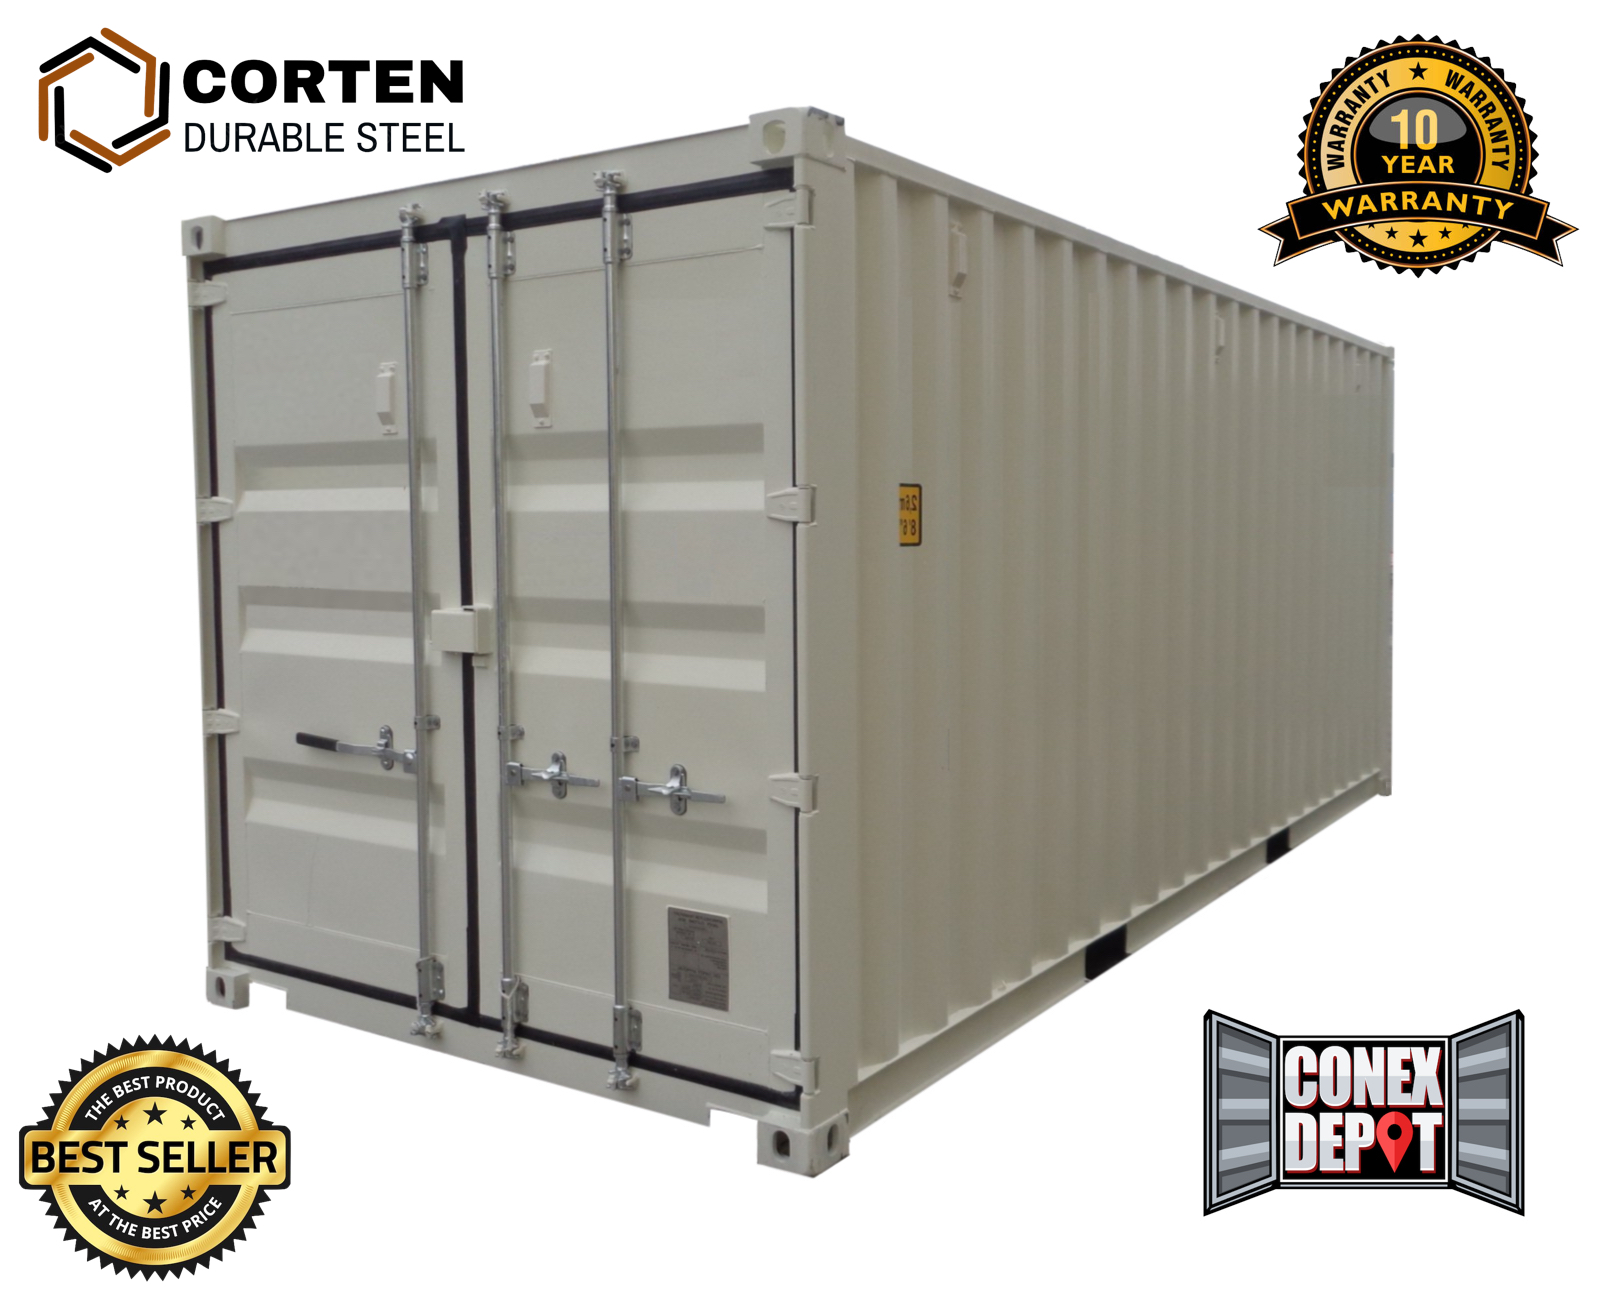 1 trip shipping containers for sale